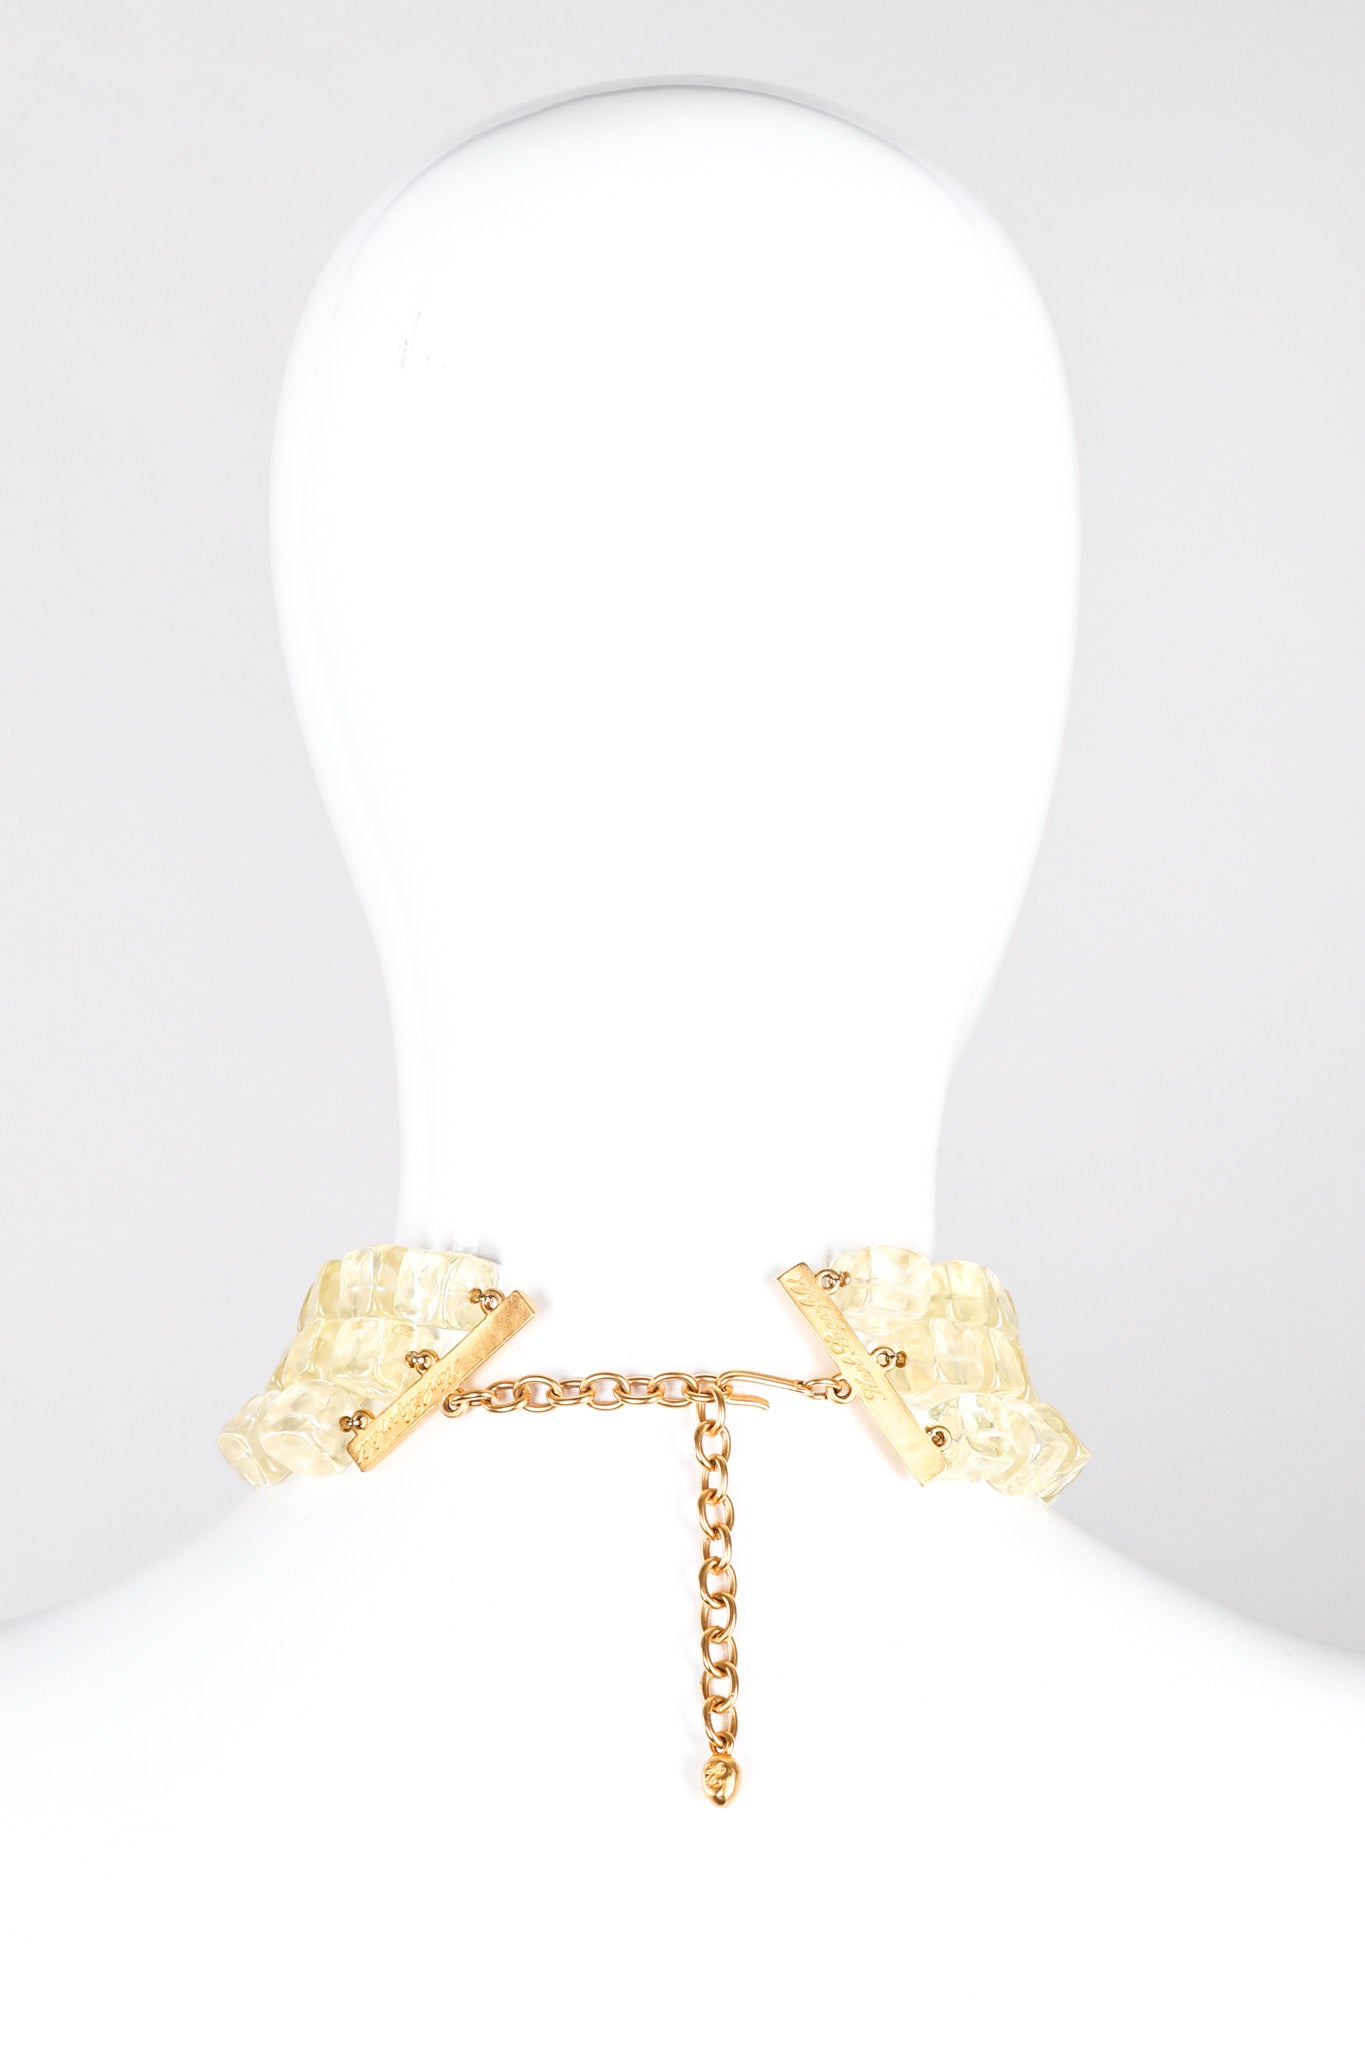 Recess Los Angeles Vintage Karl Lagerfeld Resin Frosted Cubes Chain Link Gold Collar Choker